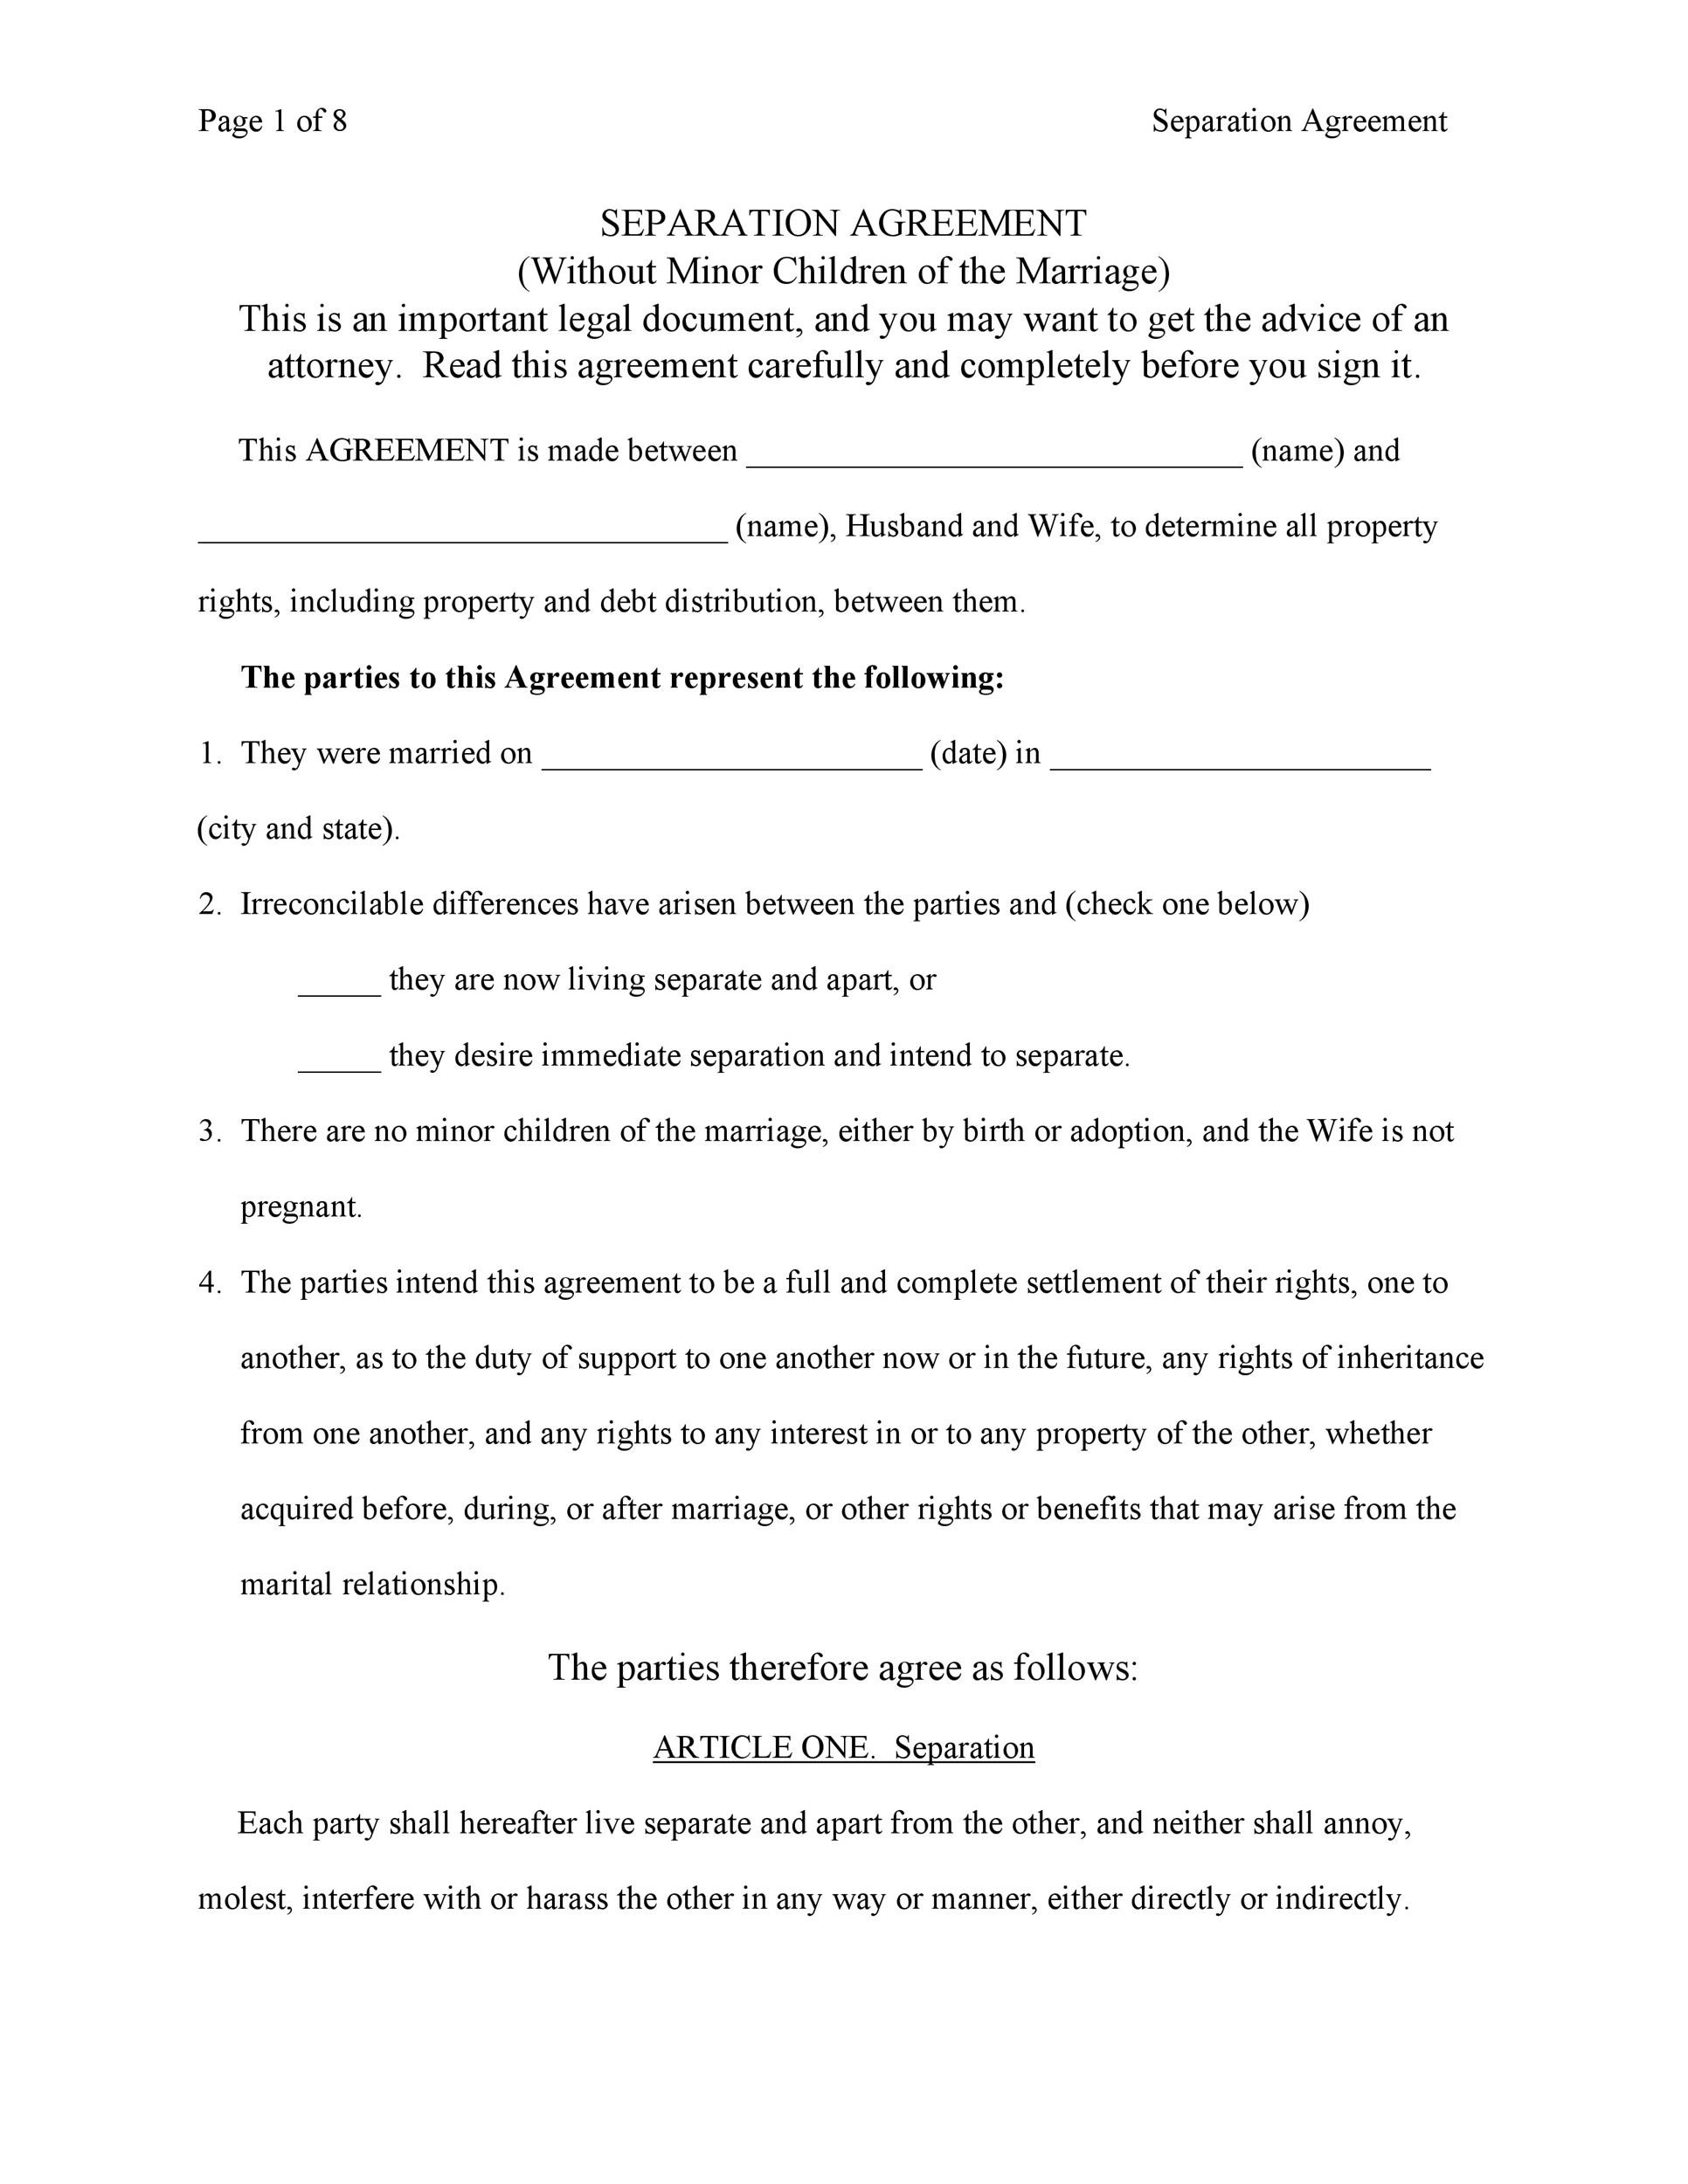 43 Official Separation Agreement Templates Letters Forms ᐅ Templatelab